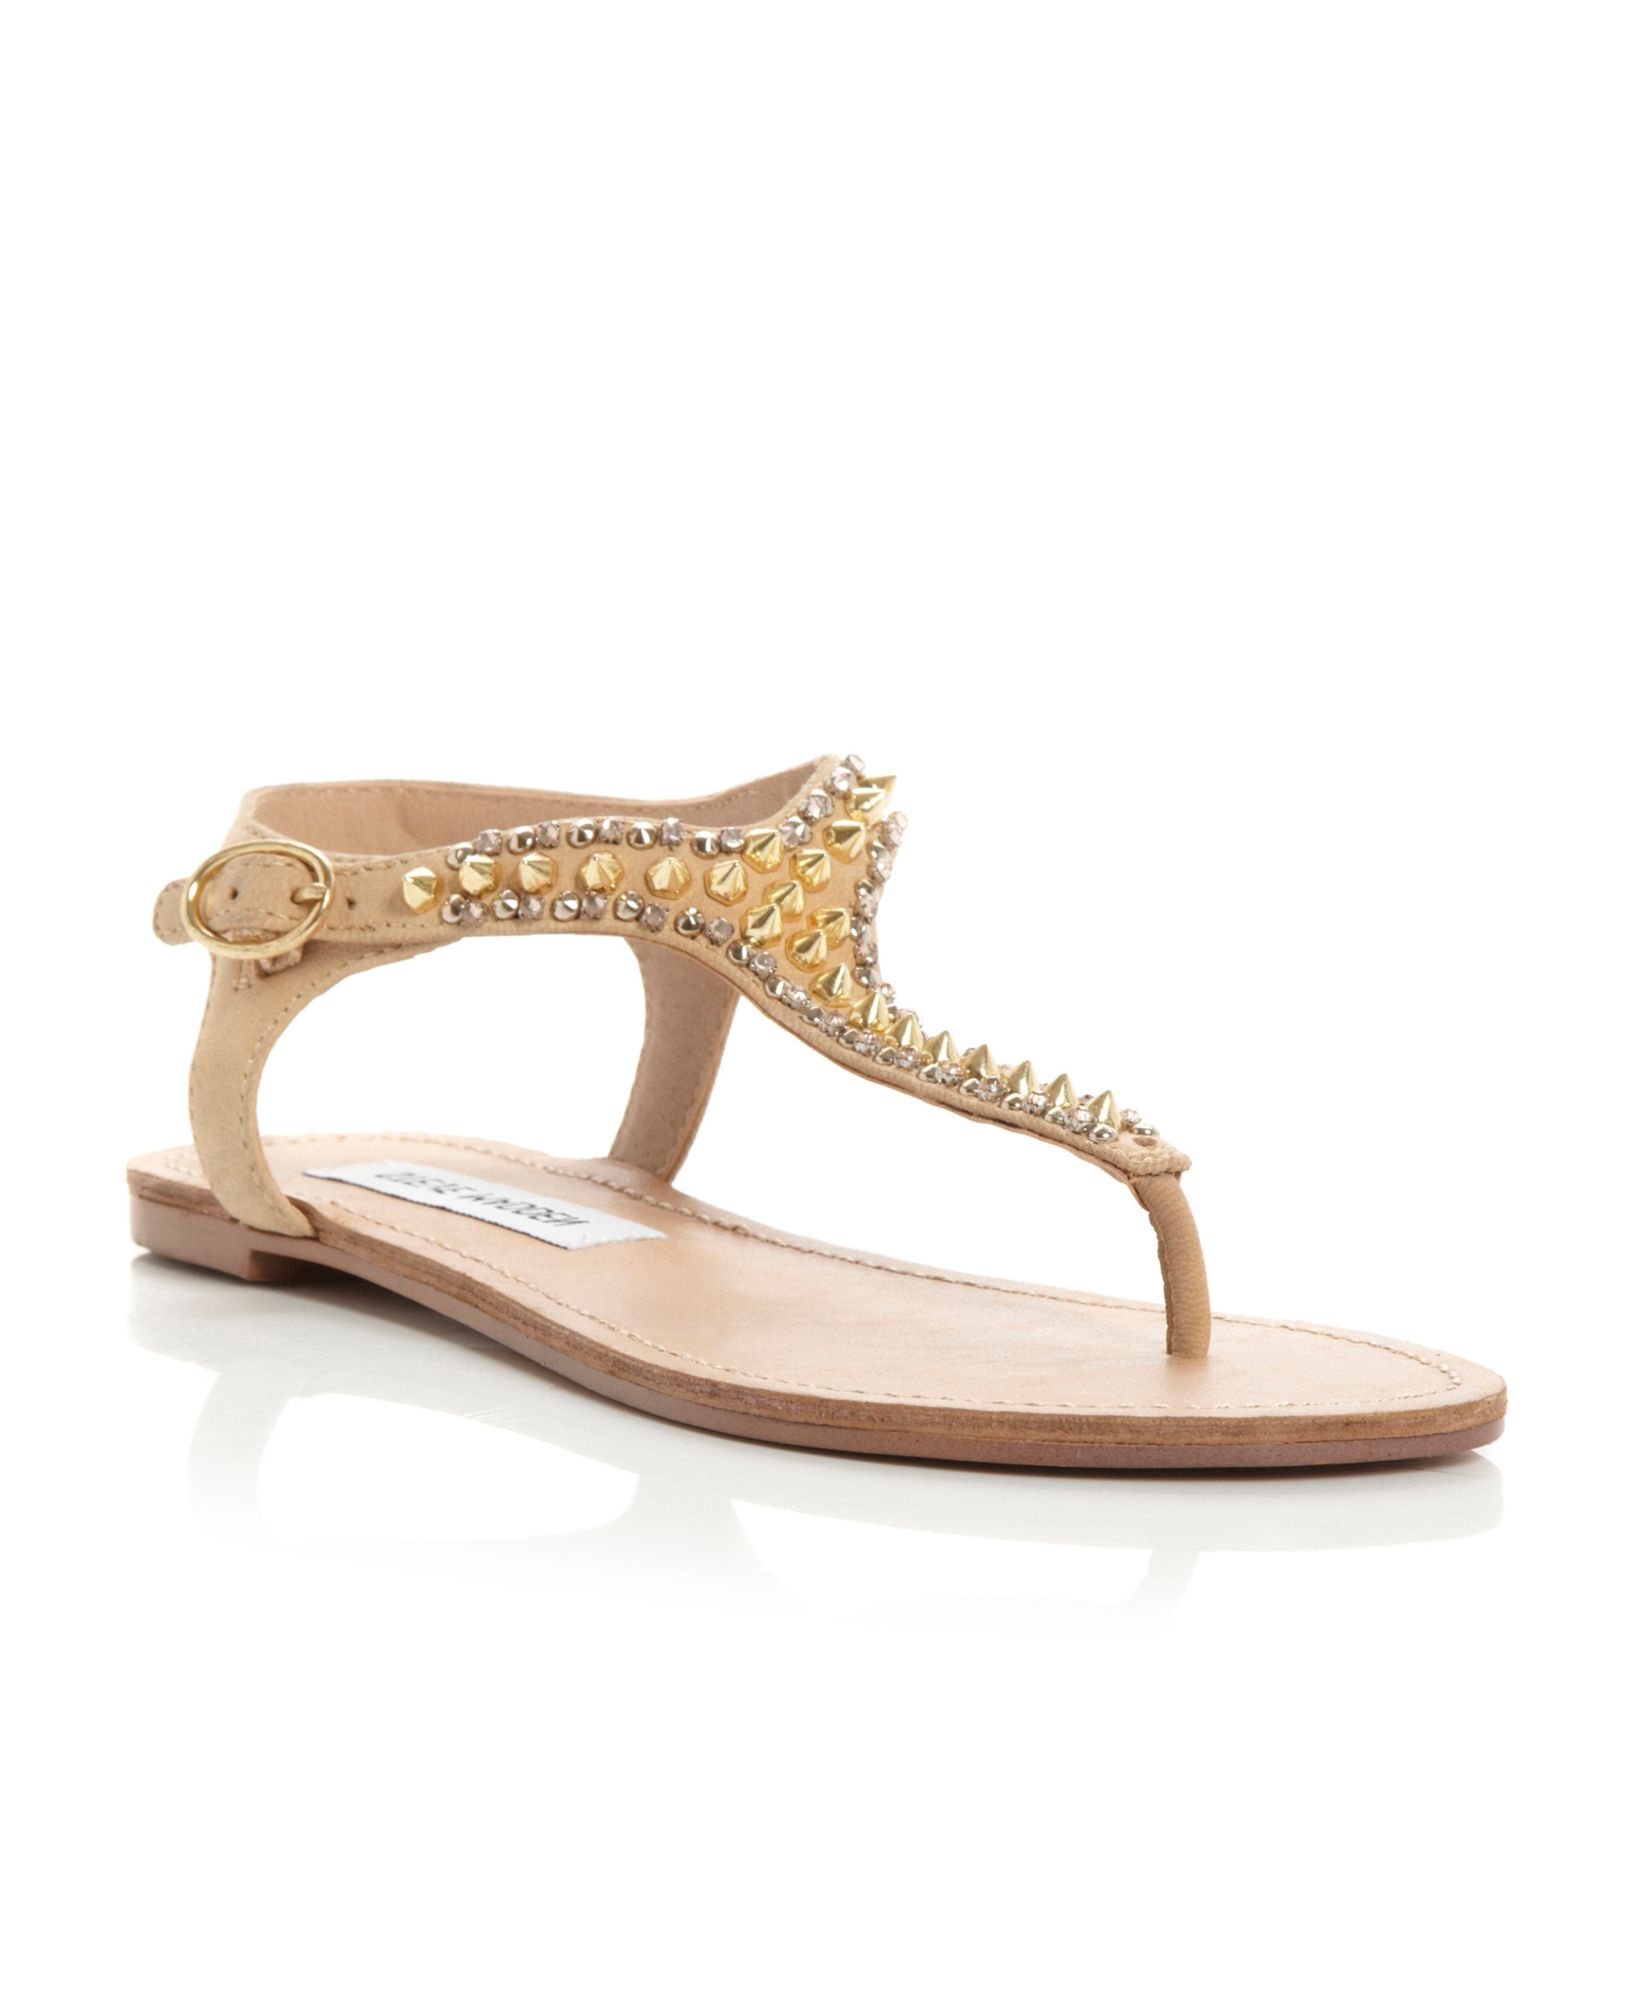 Steve madden Beyyond Studded Toe Thong Sandals in Brown | Lyst